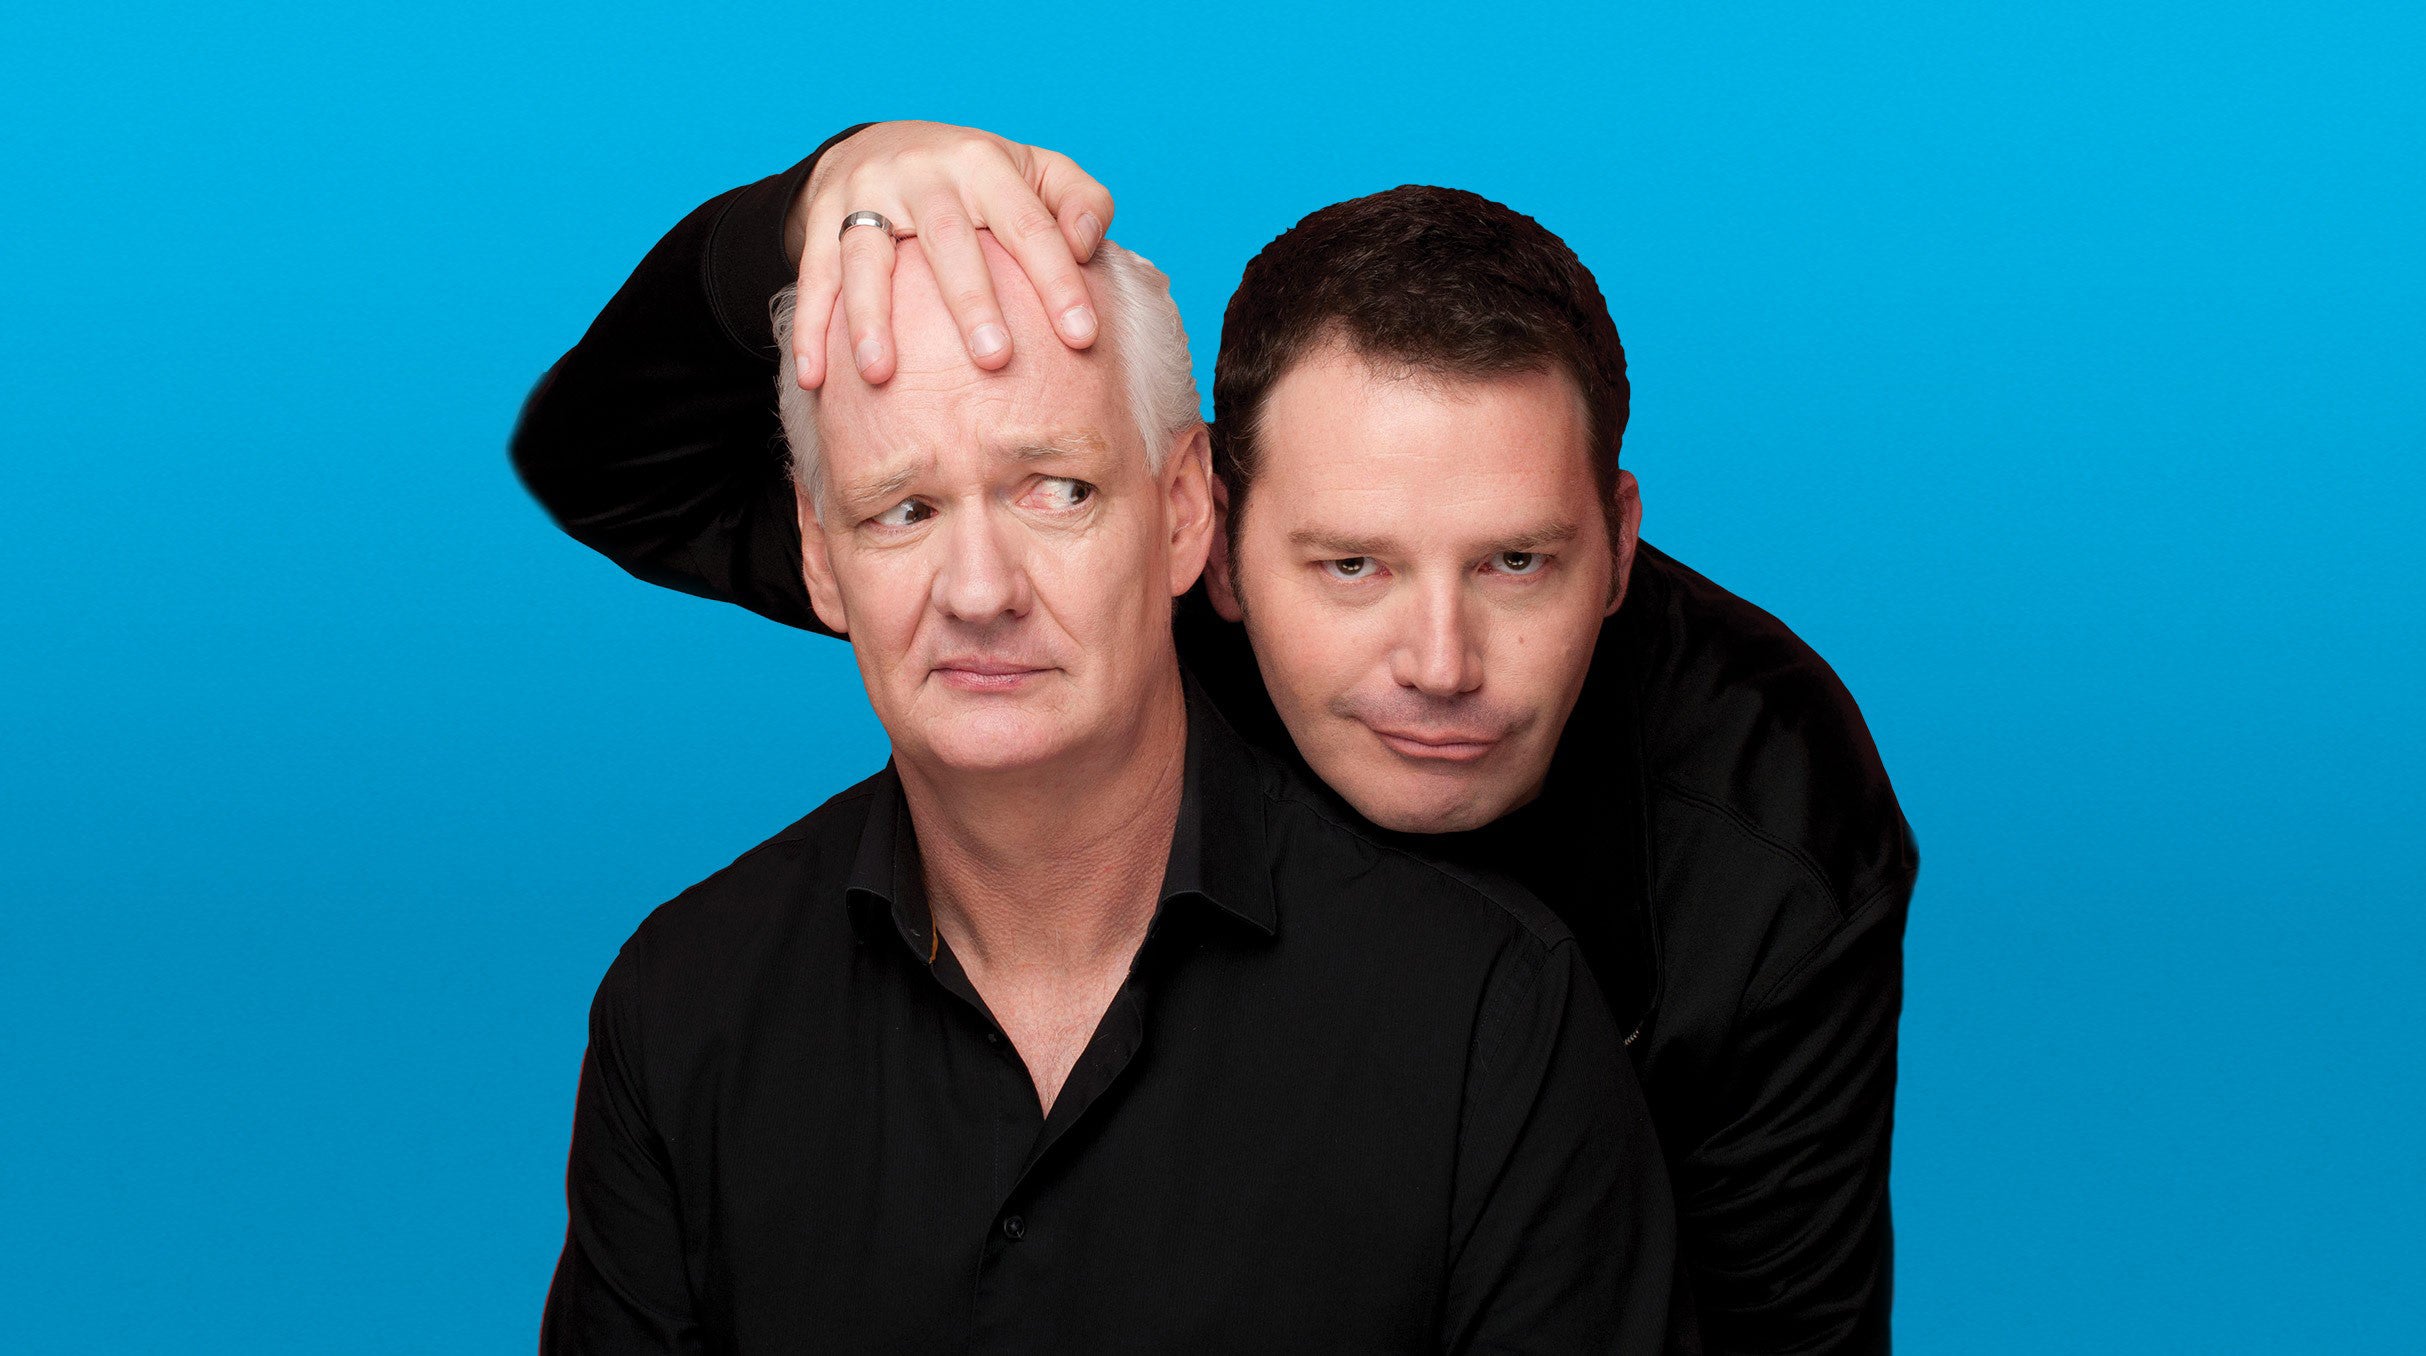 Colin Mochrie & Brad Sherwood: Asking for Trouble in Akron promo photo for Exclusive presale offer code